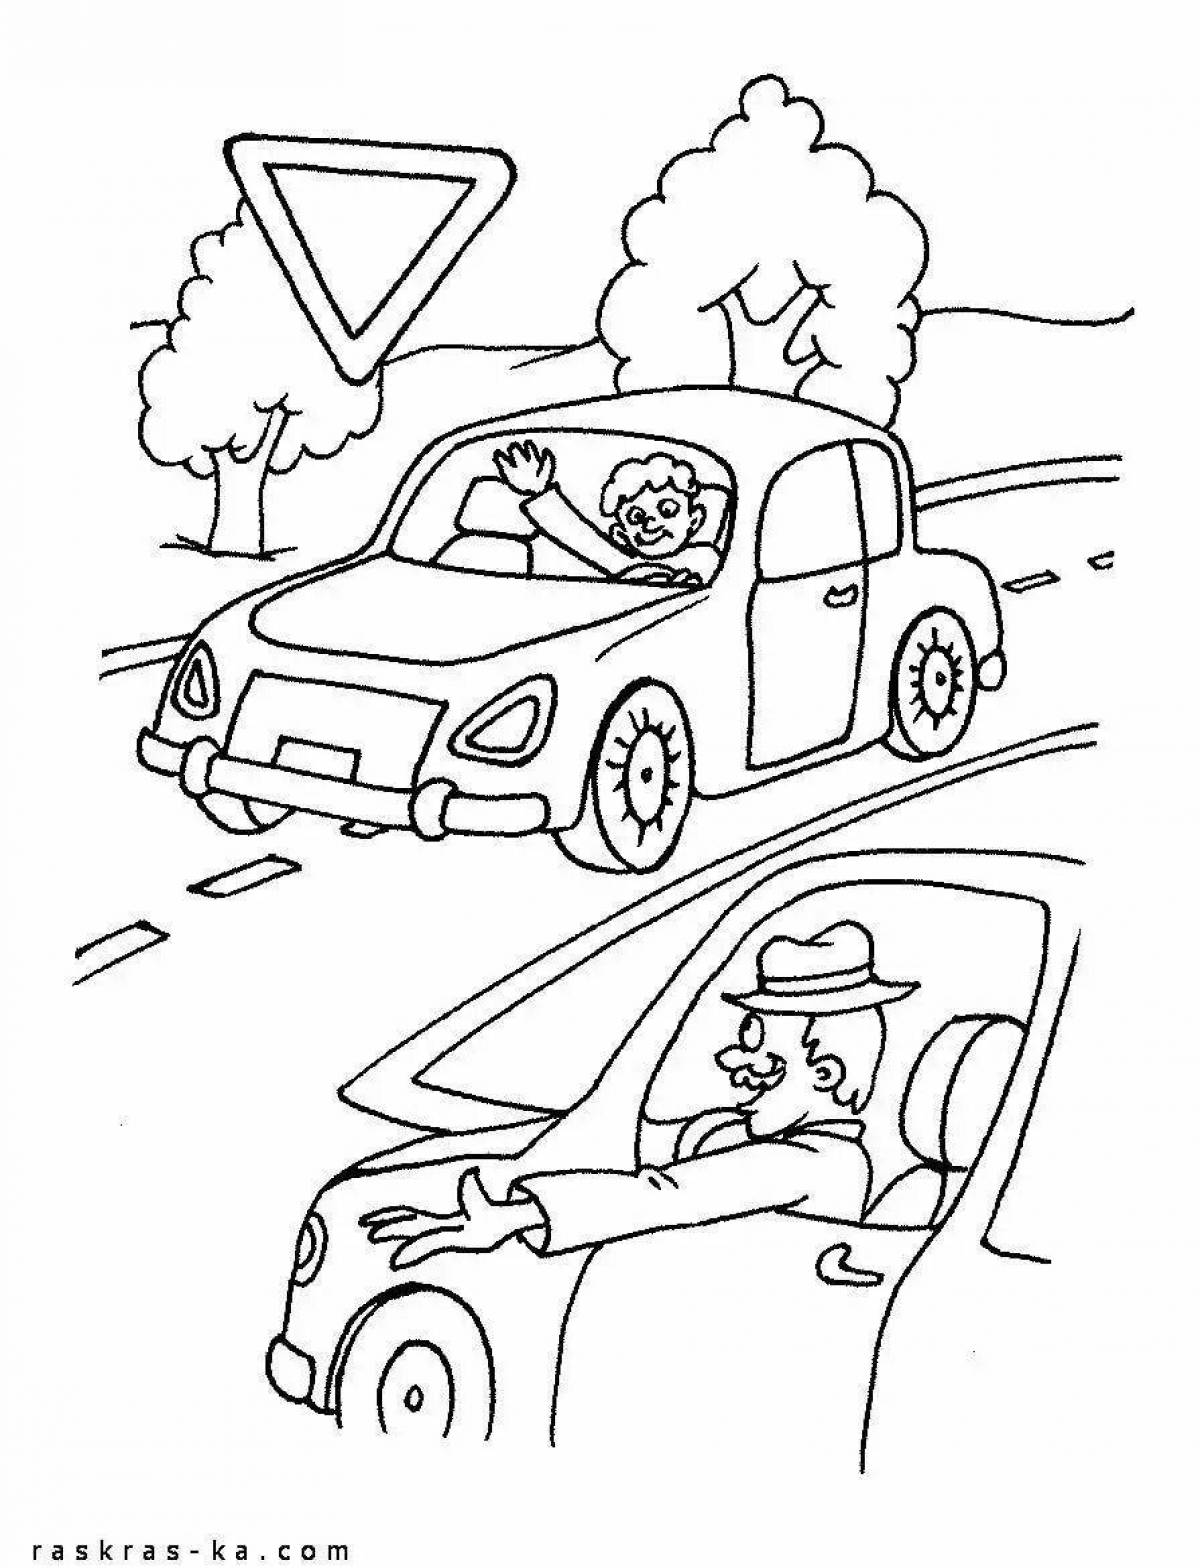 Colorful road signs coloring pages for schoolchildren